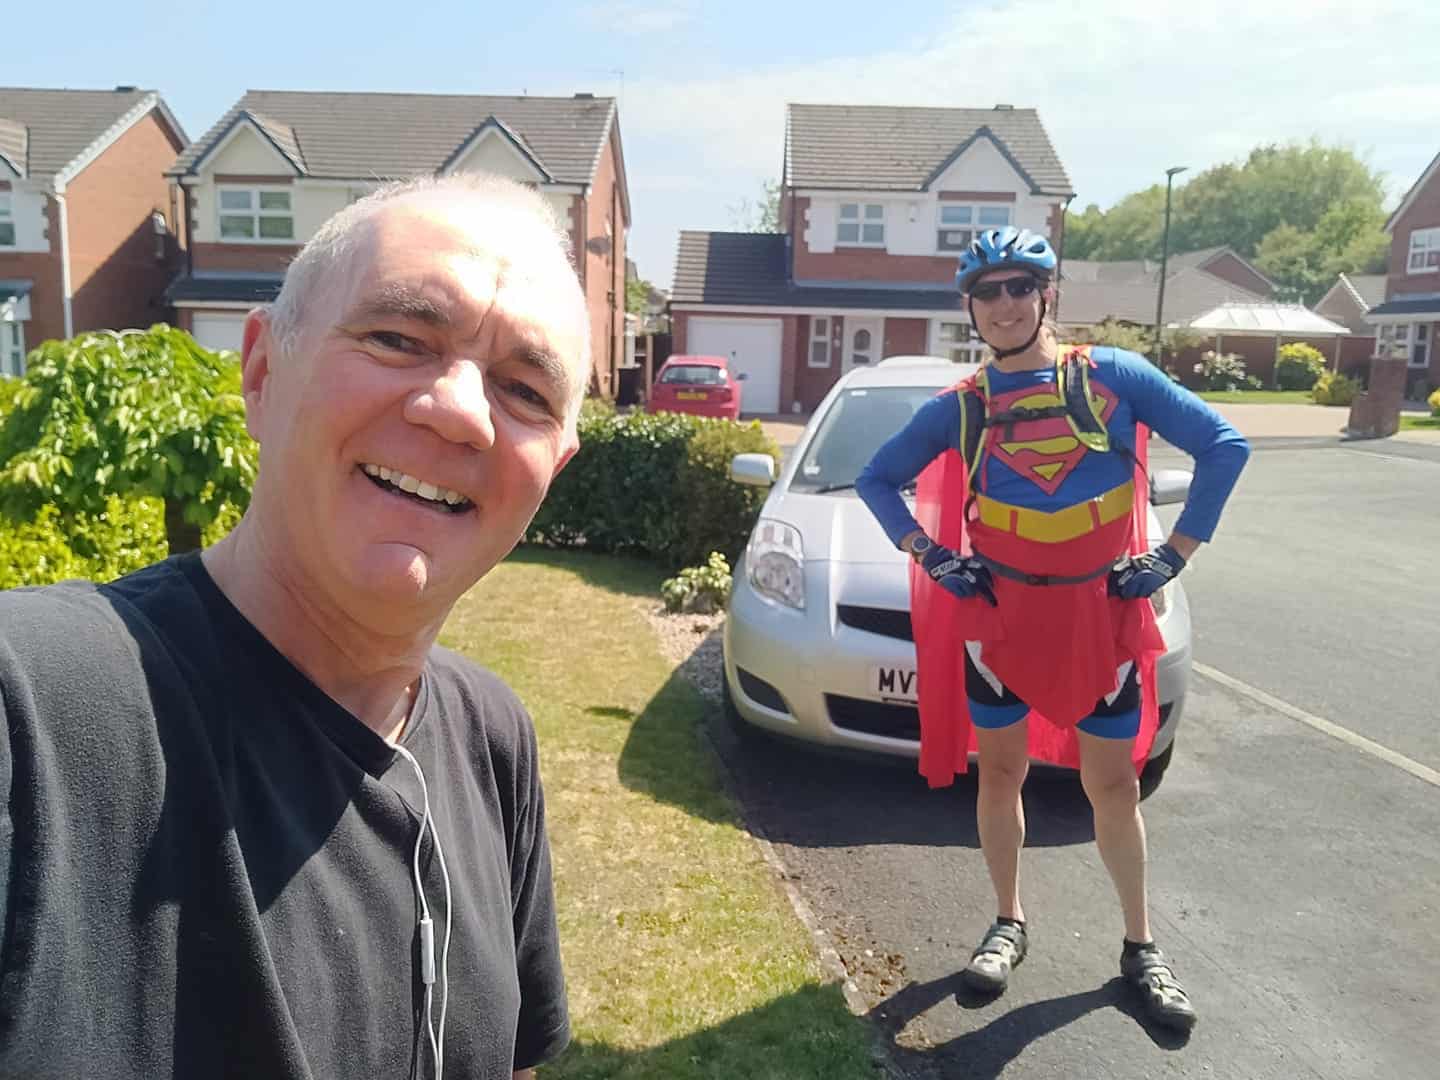 It's not very often you get to meet a real-life super-hero. 🚴 Tony L Smith collecting some headbands for Headbands for Heroes UK.